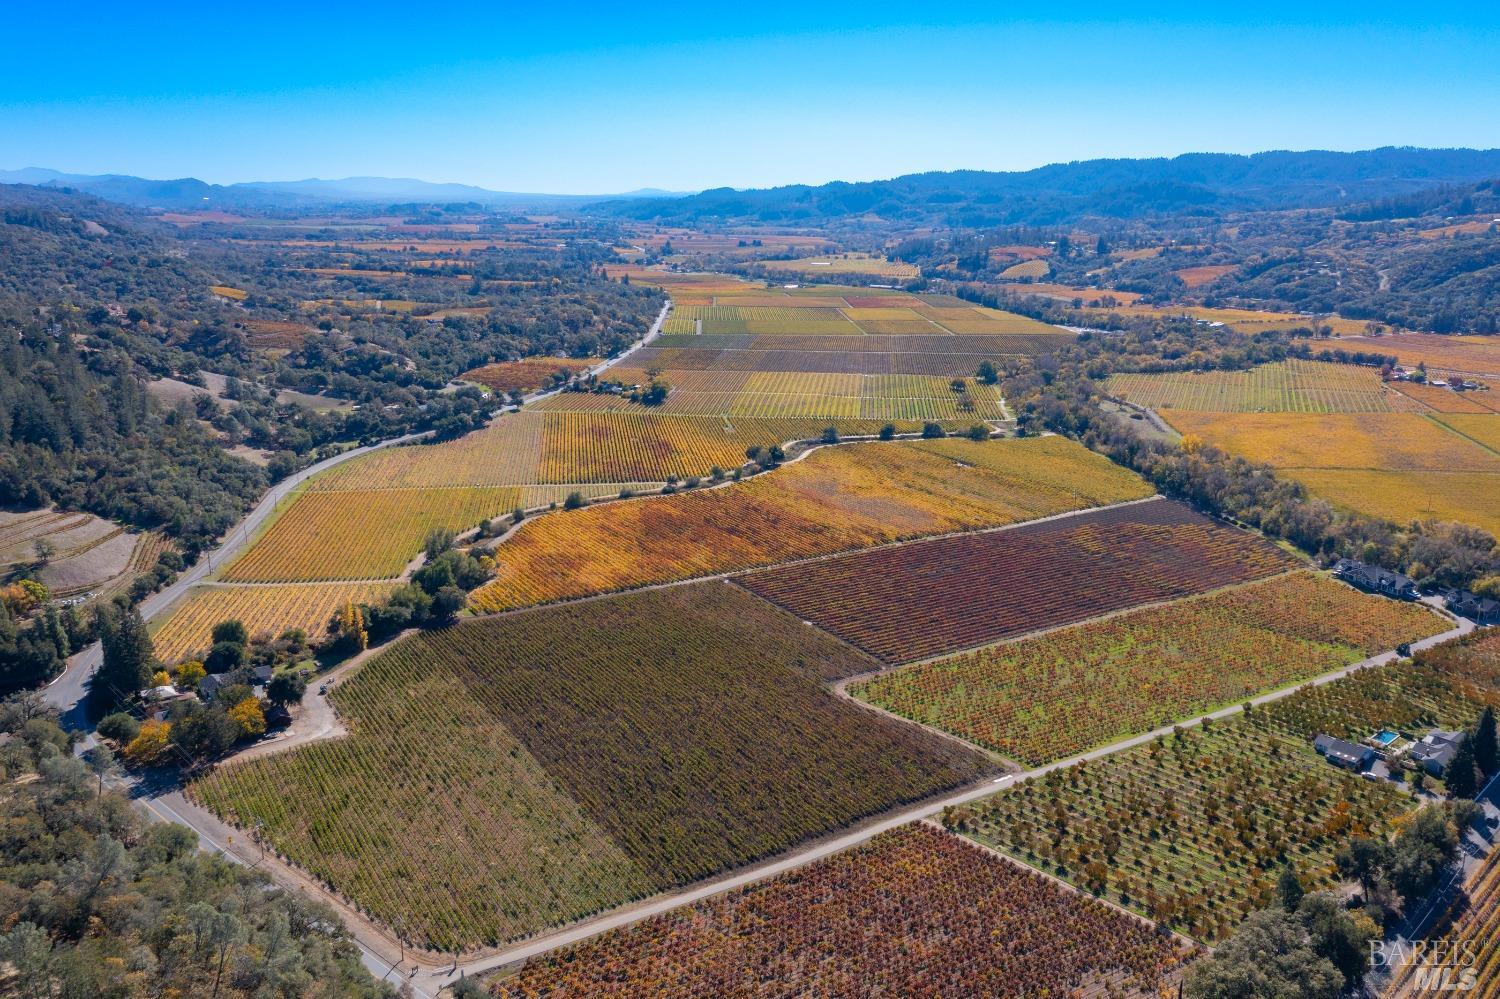 This impressive vineyard estate sits on a sprawling 28.99 acre parcel within the famous Dry Creek vineyard valley of Healdsburg. The charming ranch style main house was built in 1875 with 1,400 Sq Ft with an additional 1,200 Sq Ft ADU (Guest House) & 1,000 Sq Ft studio in addition to a barn and 3 car garage, all with rare Dry Creek frontage. Enjoy everything this vast estate has to offer, from views, privacy and income producing vineyards, all with minutes from downtown Healdsburg, Geyserville, and Lake Sonoma. The 24+/- planted vine acres is comprised approximately 12 acres of Cabernet Sauvignon, and 12 acres of Old Vine Zinfandel served by a large Ag well and secondary domestic well. The outdoor entertaining areas are surrounded by mature redwood, walnut, and chestnut trees along with a beautiful gardening area. Take a stroll down to Dry Creek on a hot day and enjoy all this one of a kind property has to offer! Seller will consider any & all offers- owner financing may be available!!!